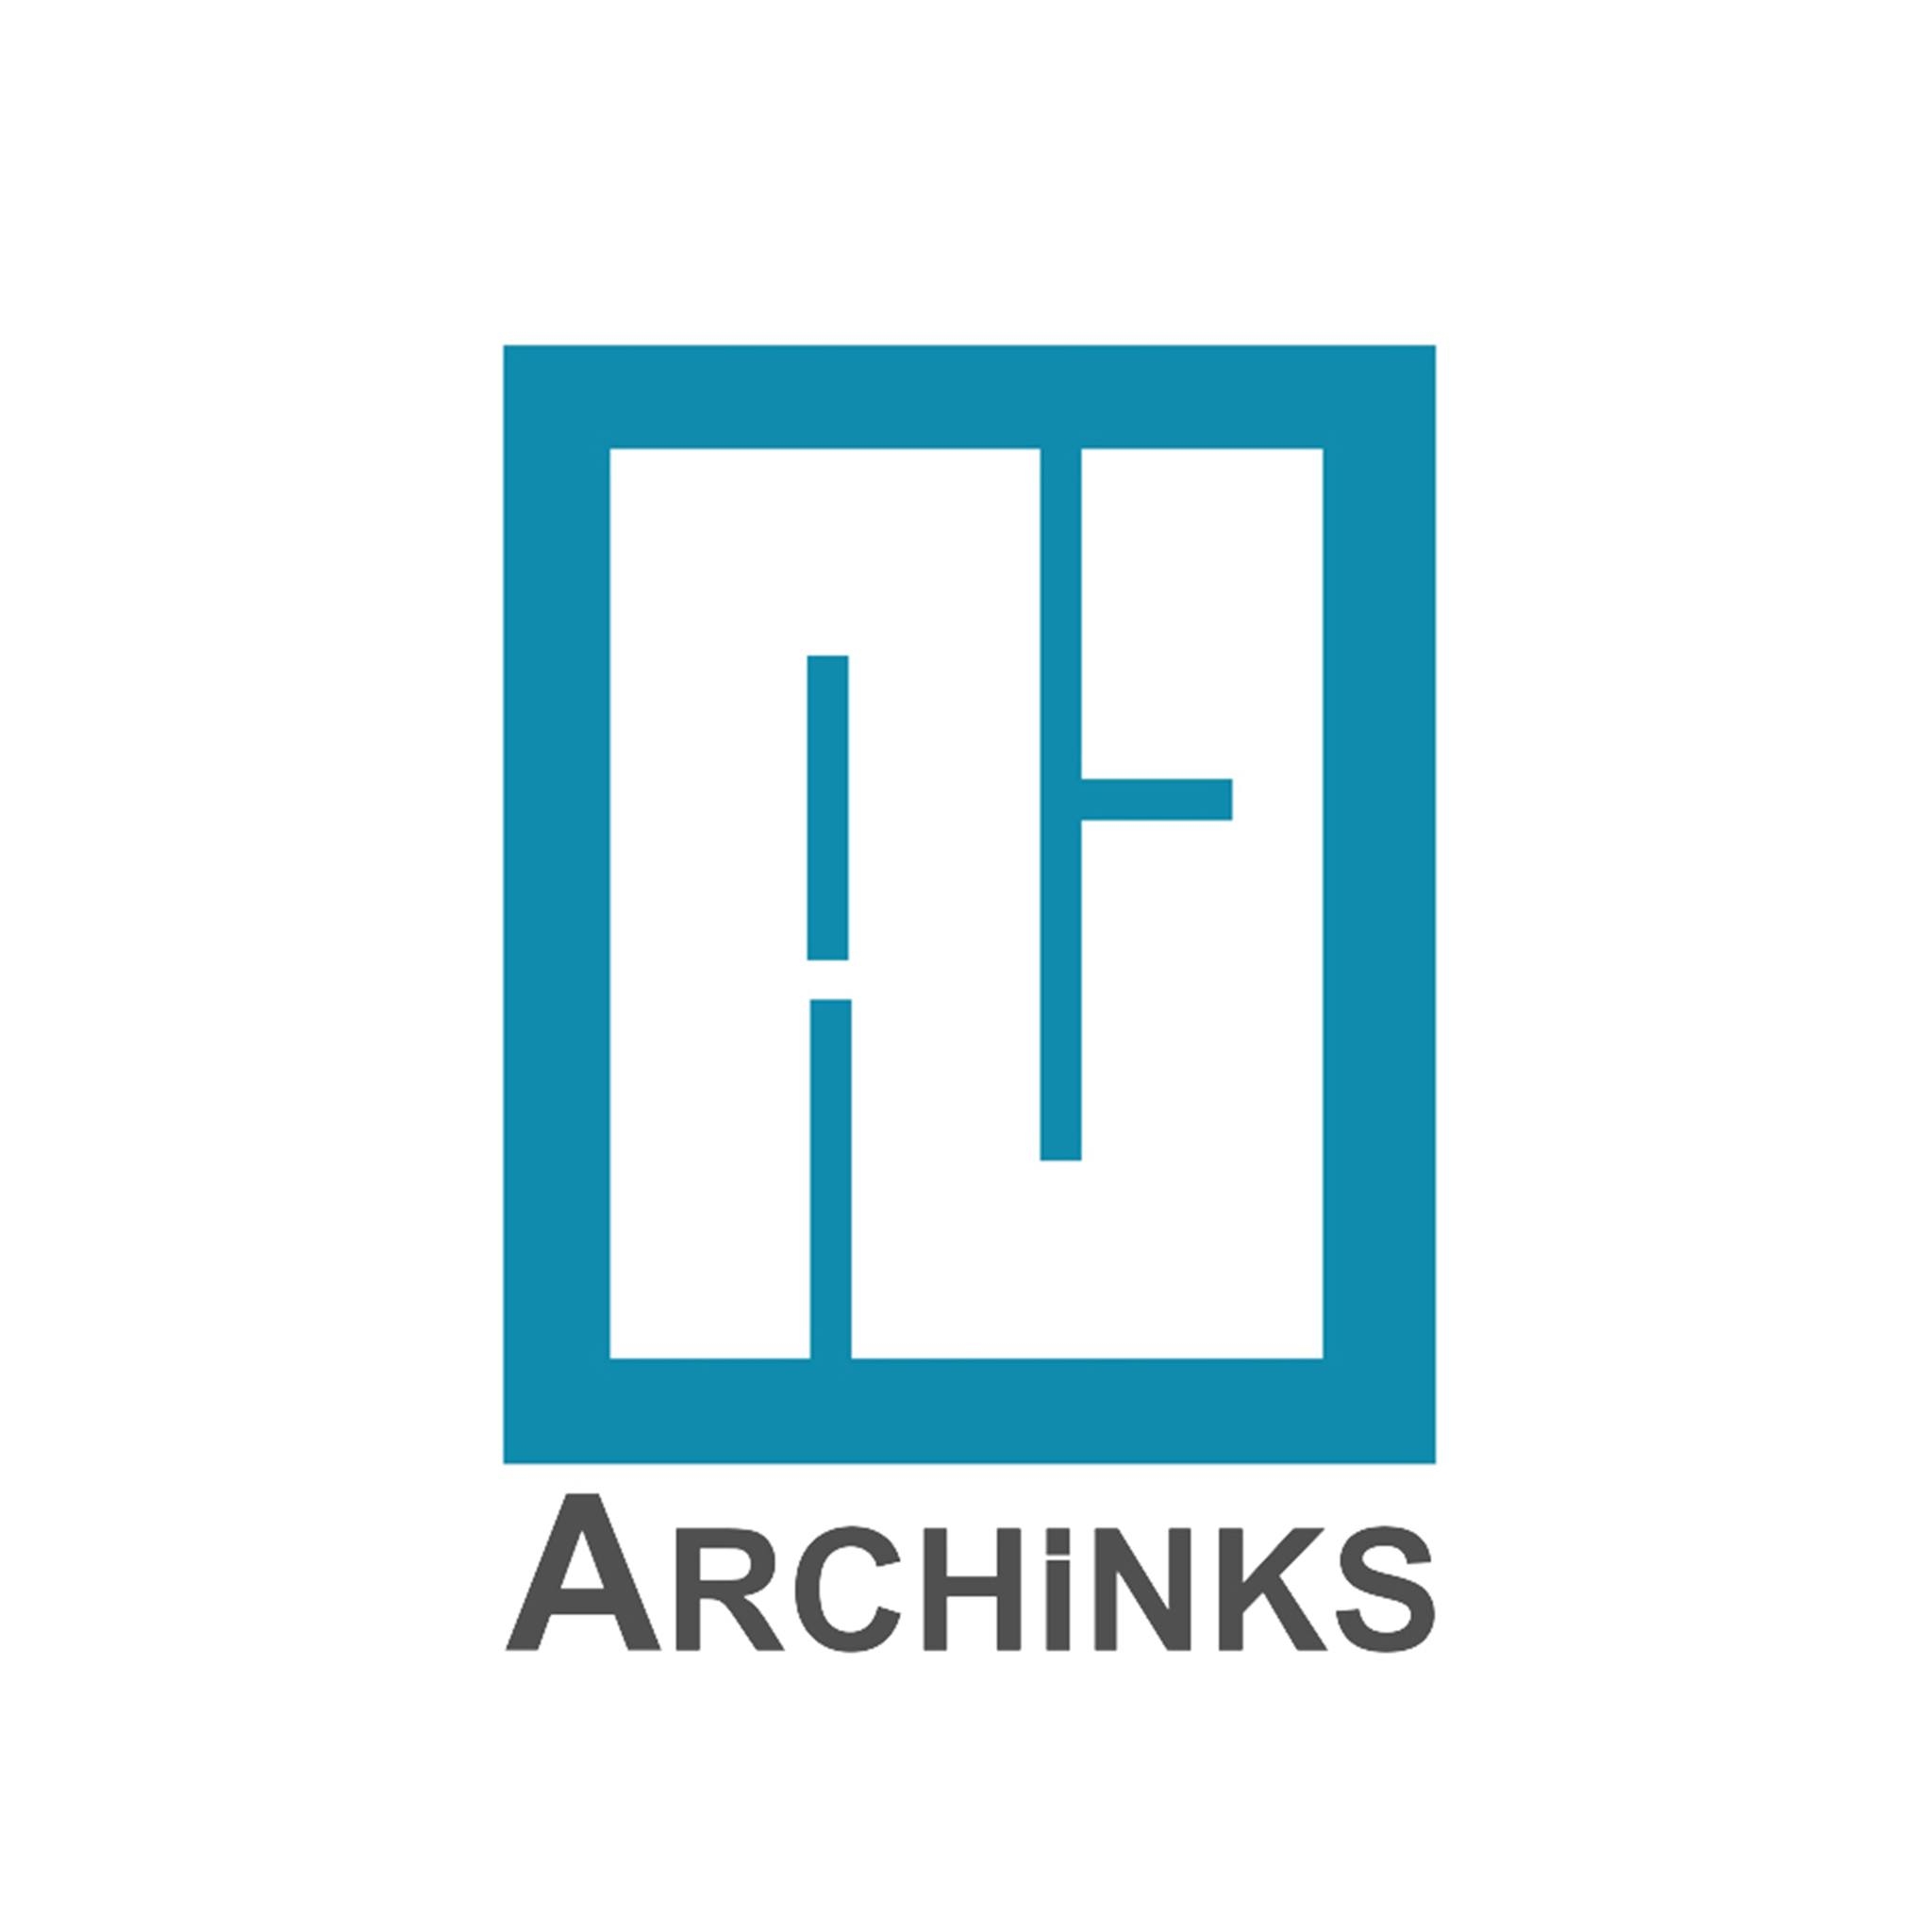 Archinks Indore (Architects | Planners | Interior Designers)|Architect|Professional Services